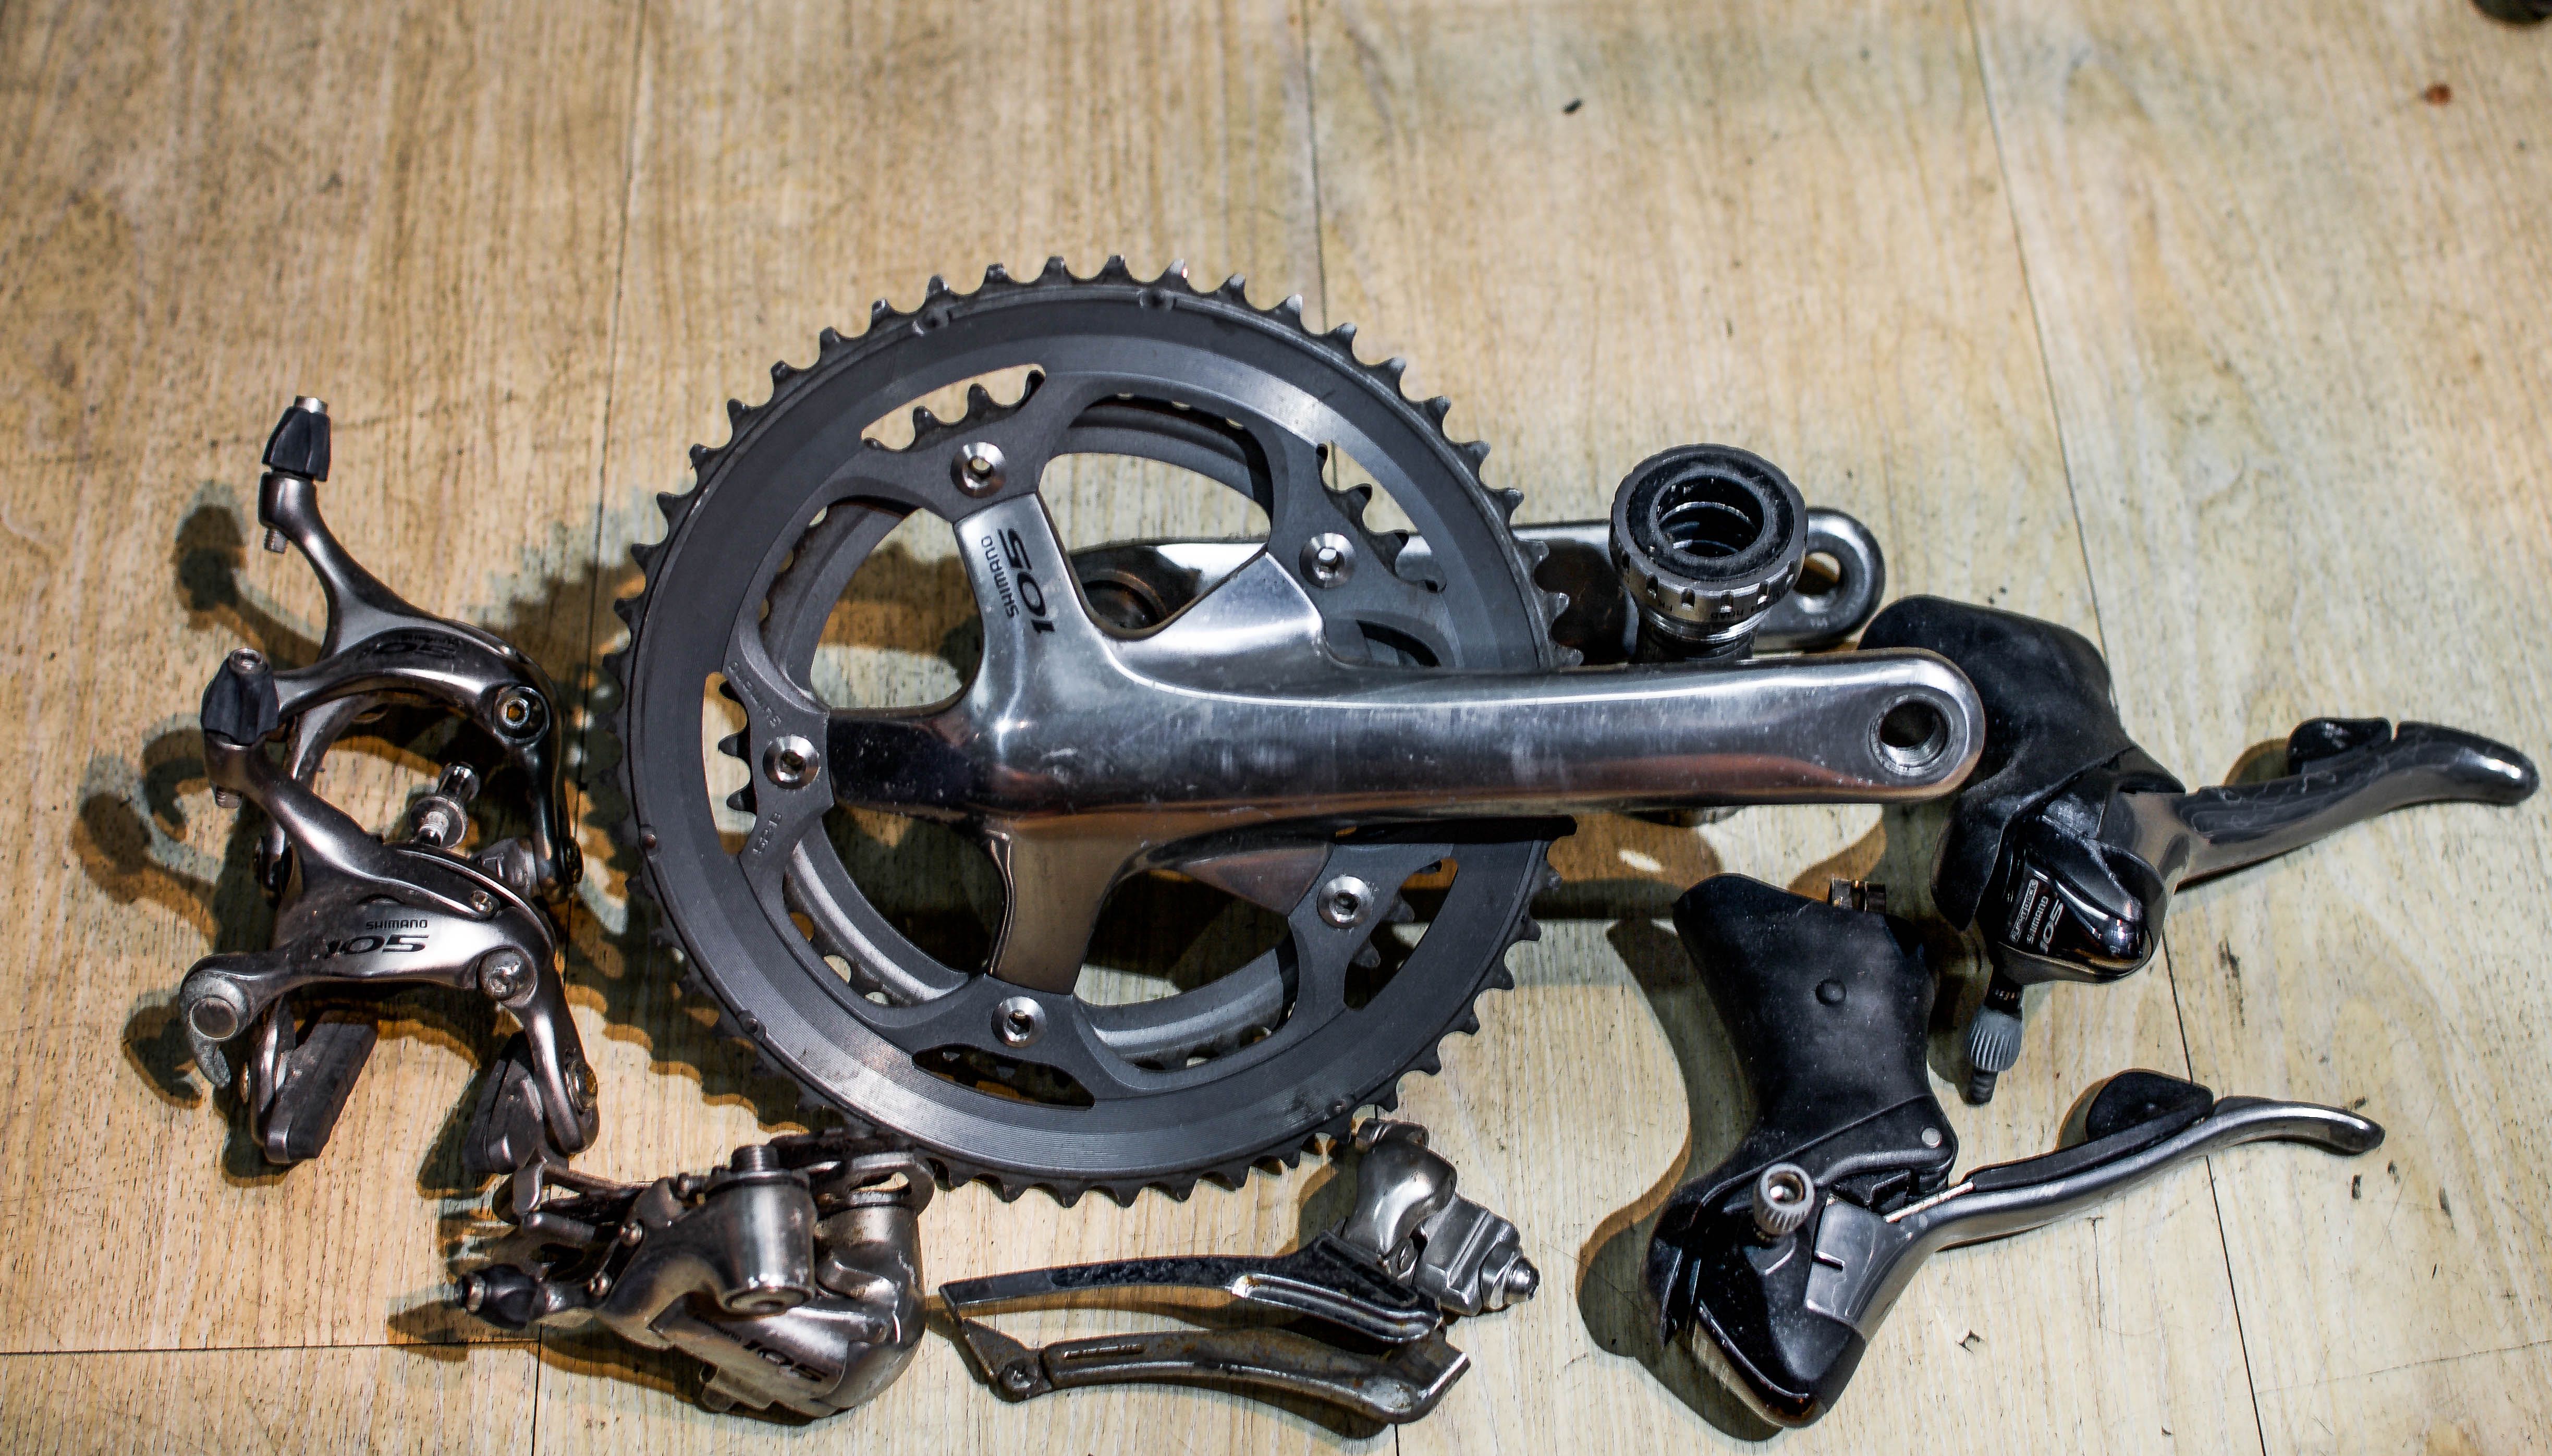 Shimano 105 5600 Groupset, Sports Equipment, Bicycles & Parts ...